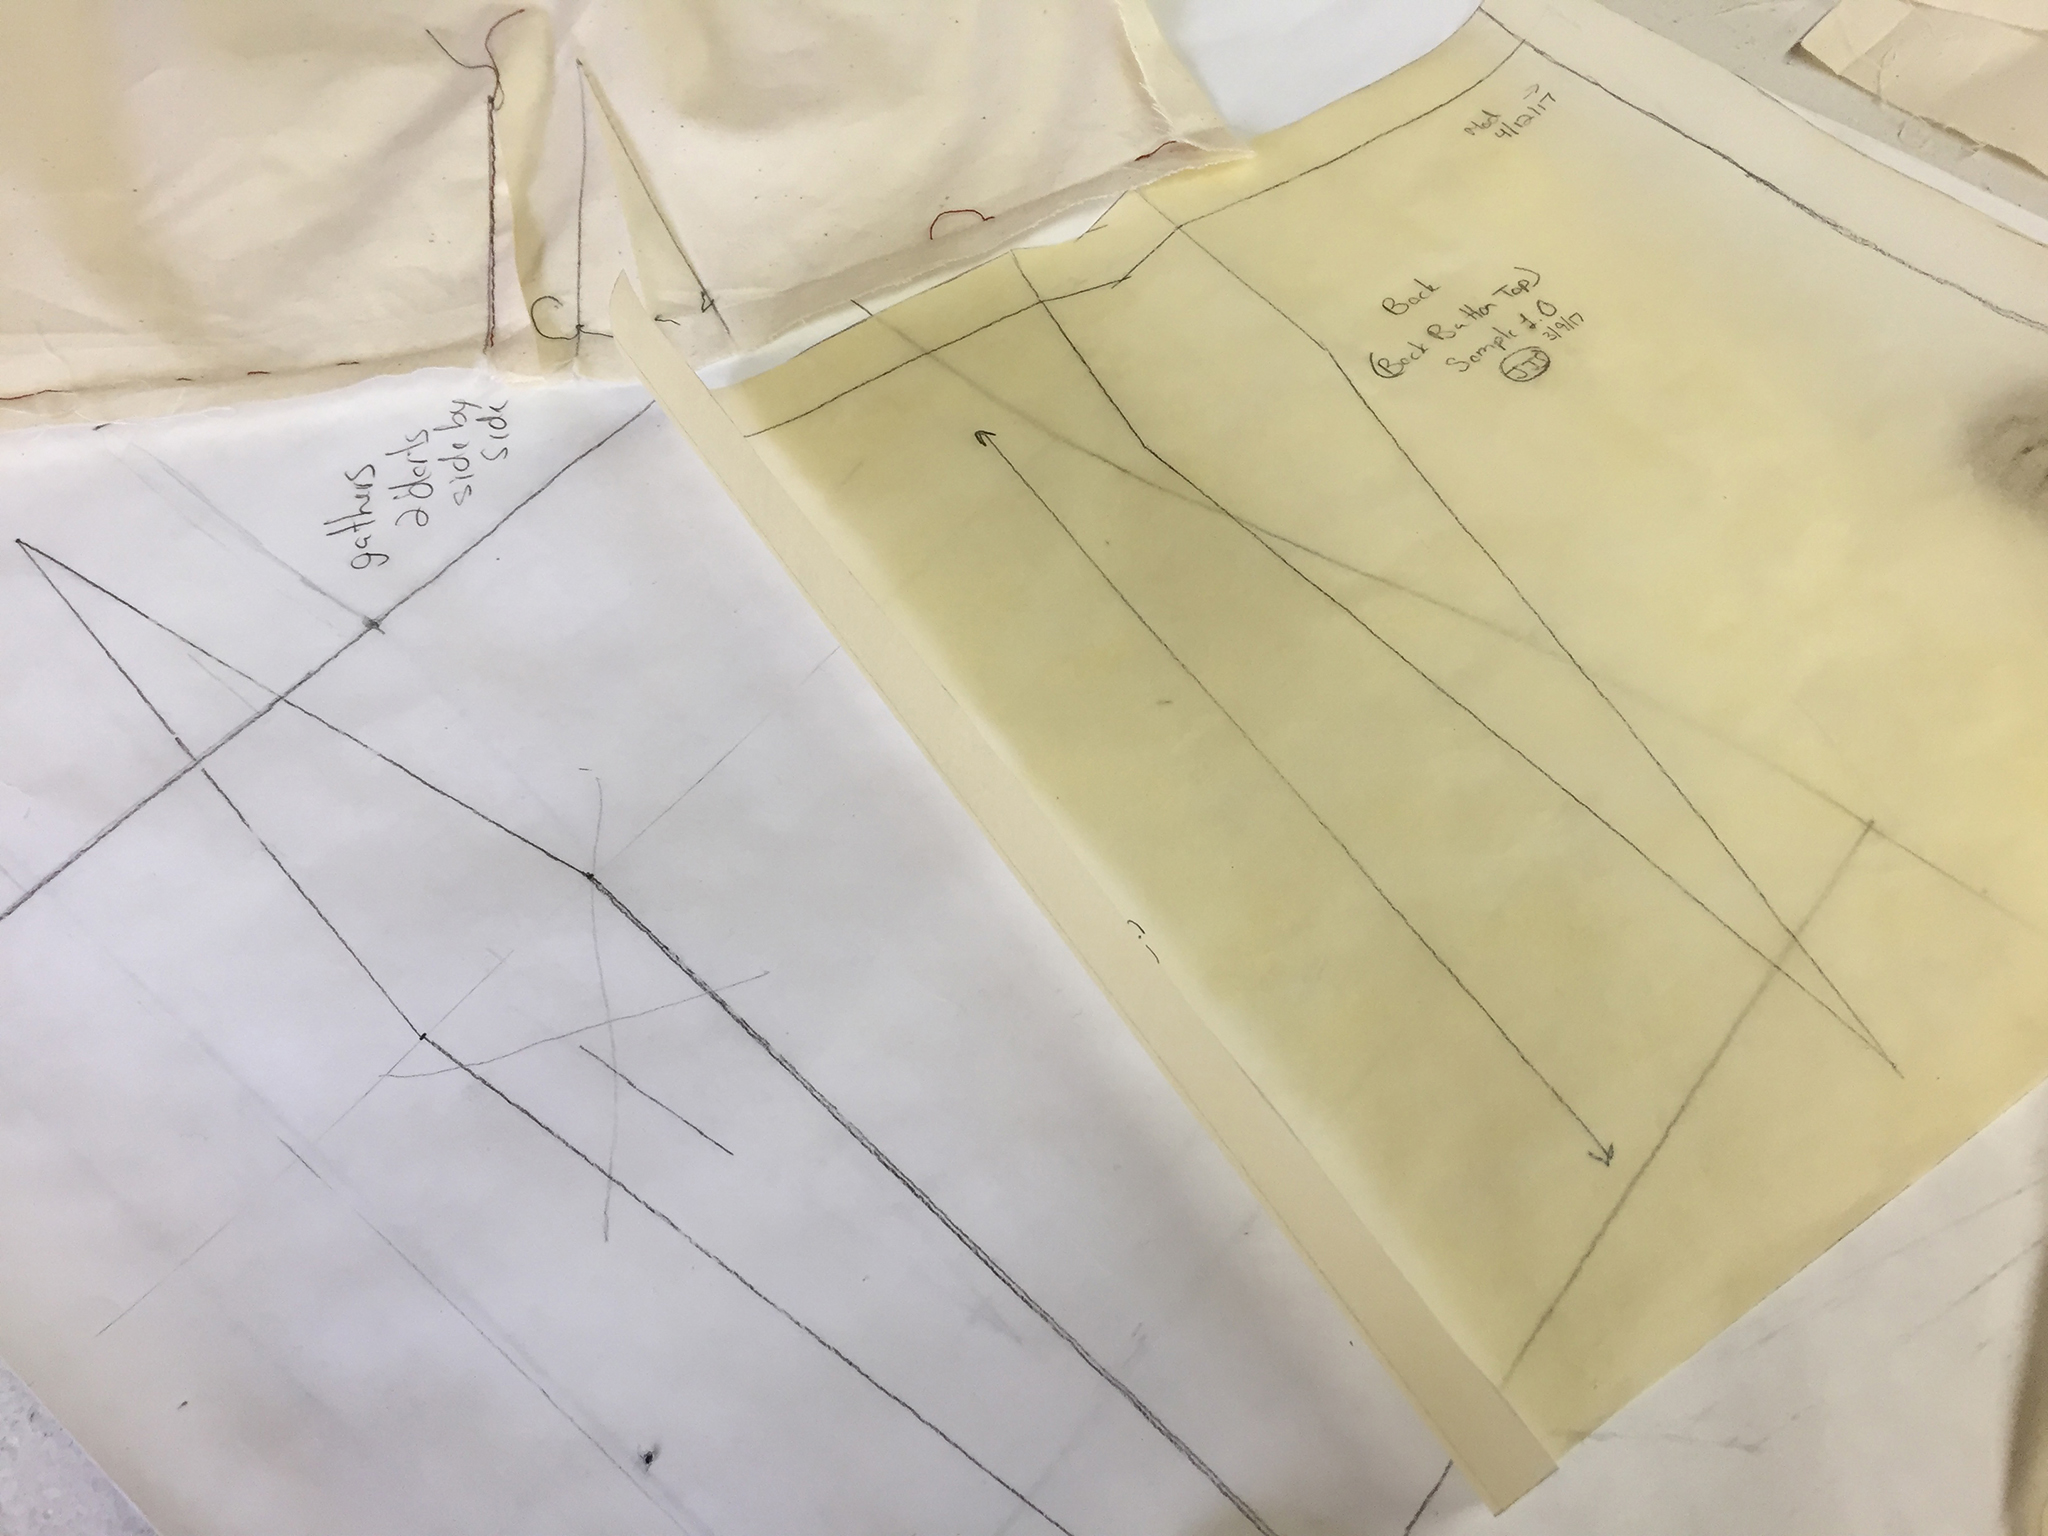 Creating my line: images of drafting and pattern making